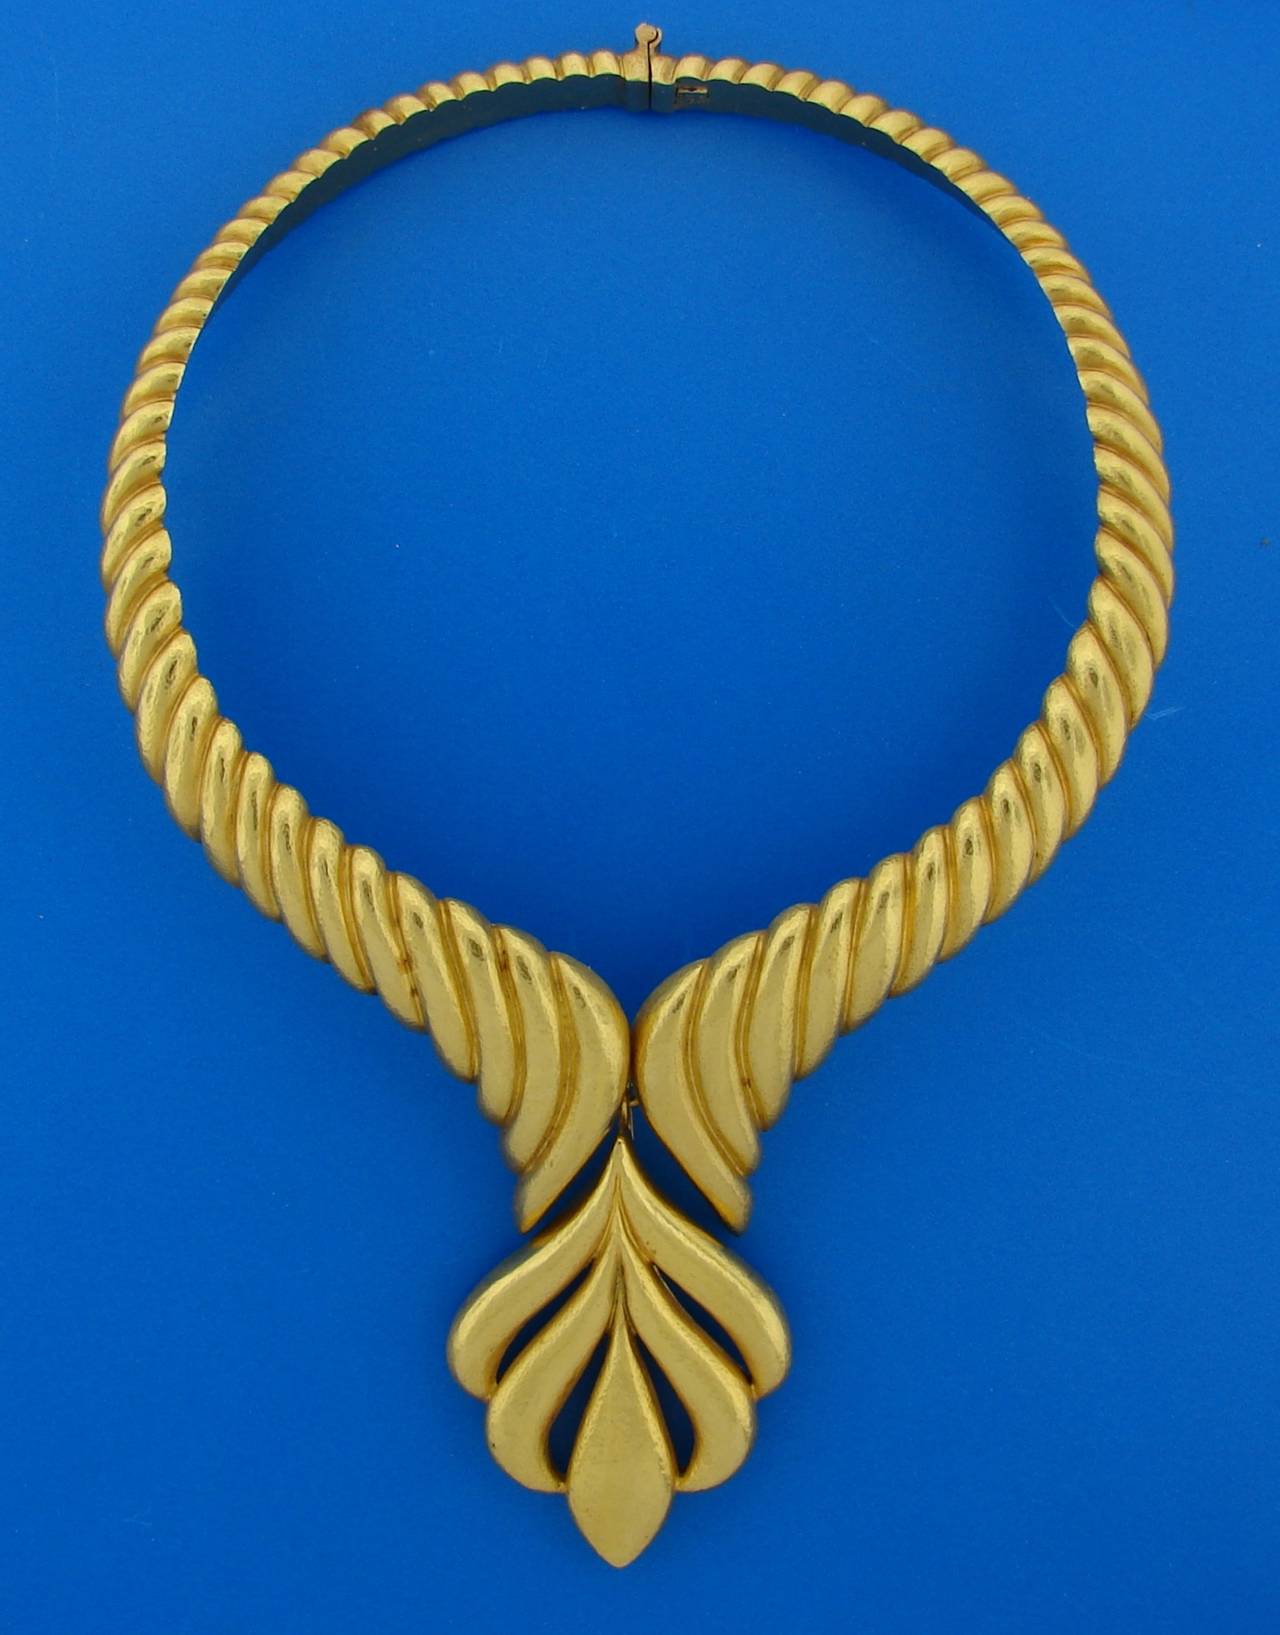 Stunning 22 karat yellow gold choker necklace created by a Greek jewelry designer Zolotas in the 1980's. It is bold yet very elegant, versatile and wearable. The pendant is removable and you can play with it putting it on a color leather or velvet